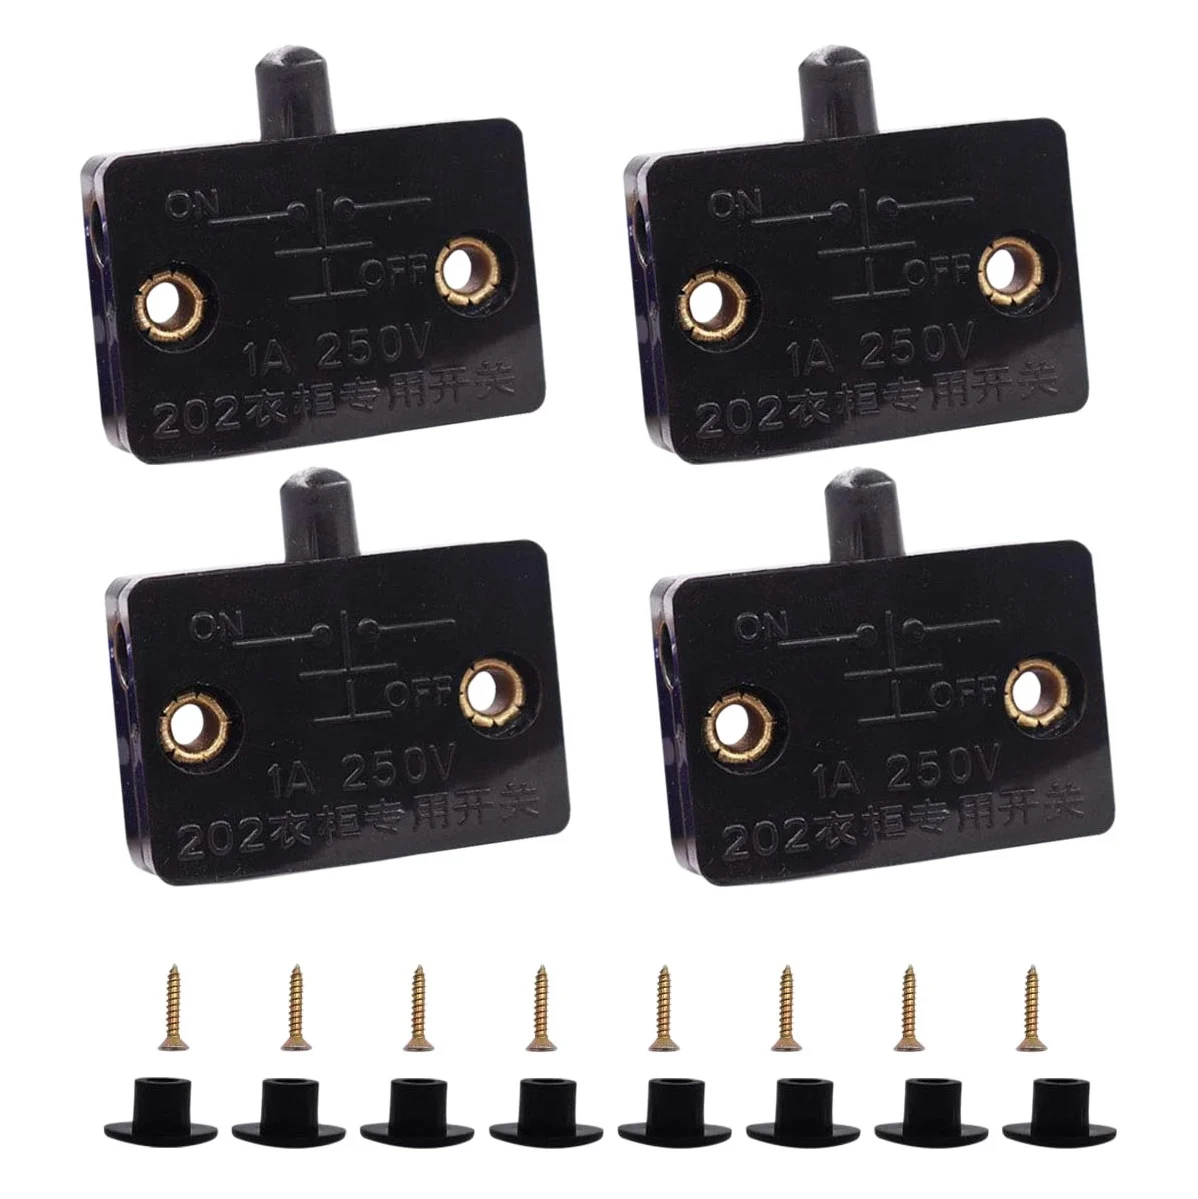 

4 Pcs Cabinet Door Switch Cabinet Lamp Switch Drawers Open on Close Door Applicable to 12V 24V 110V Black